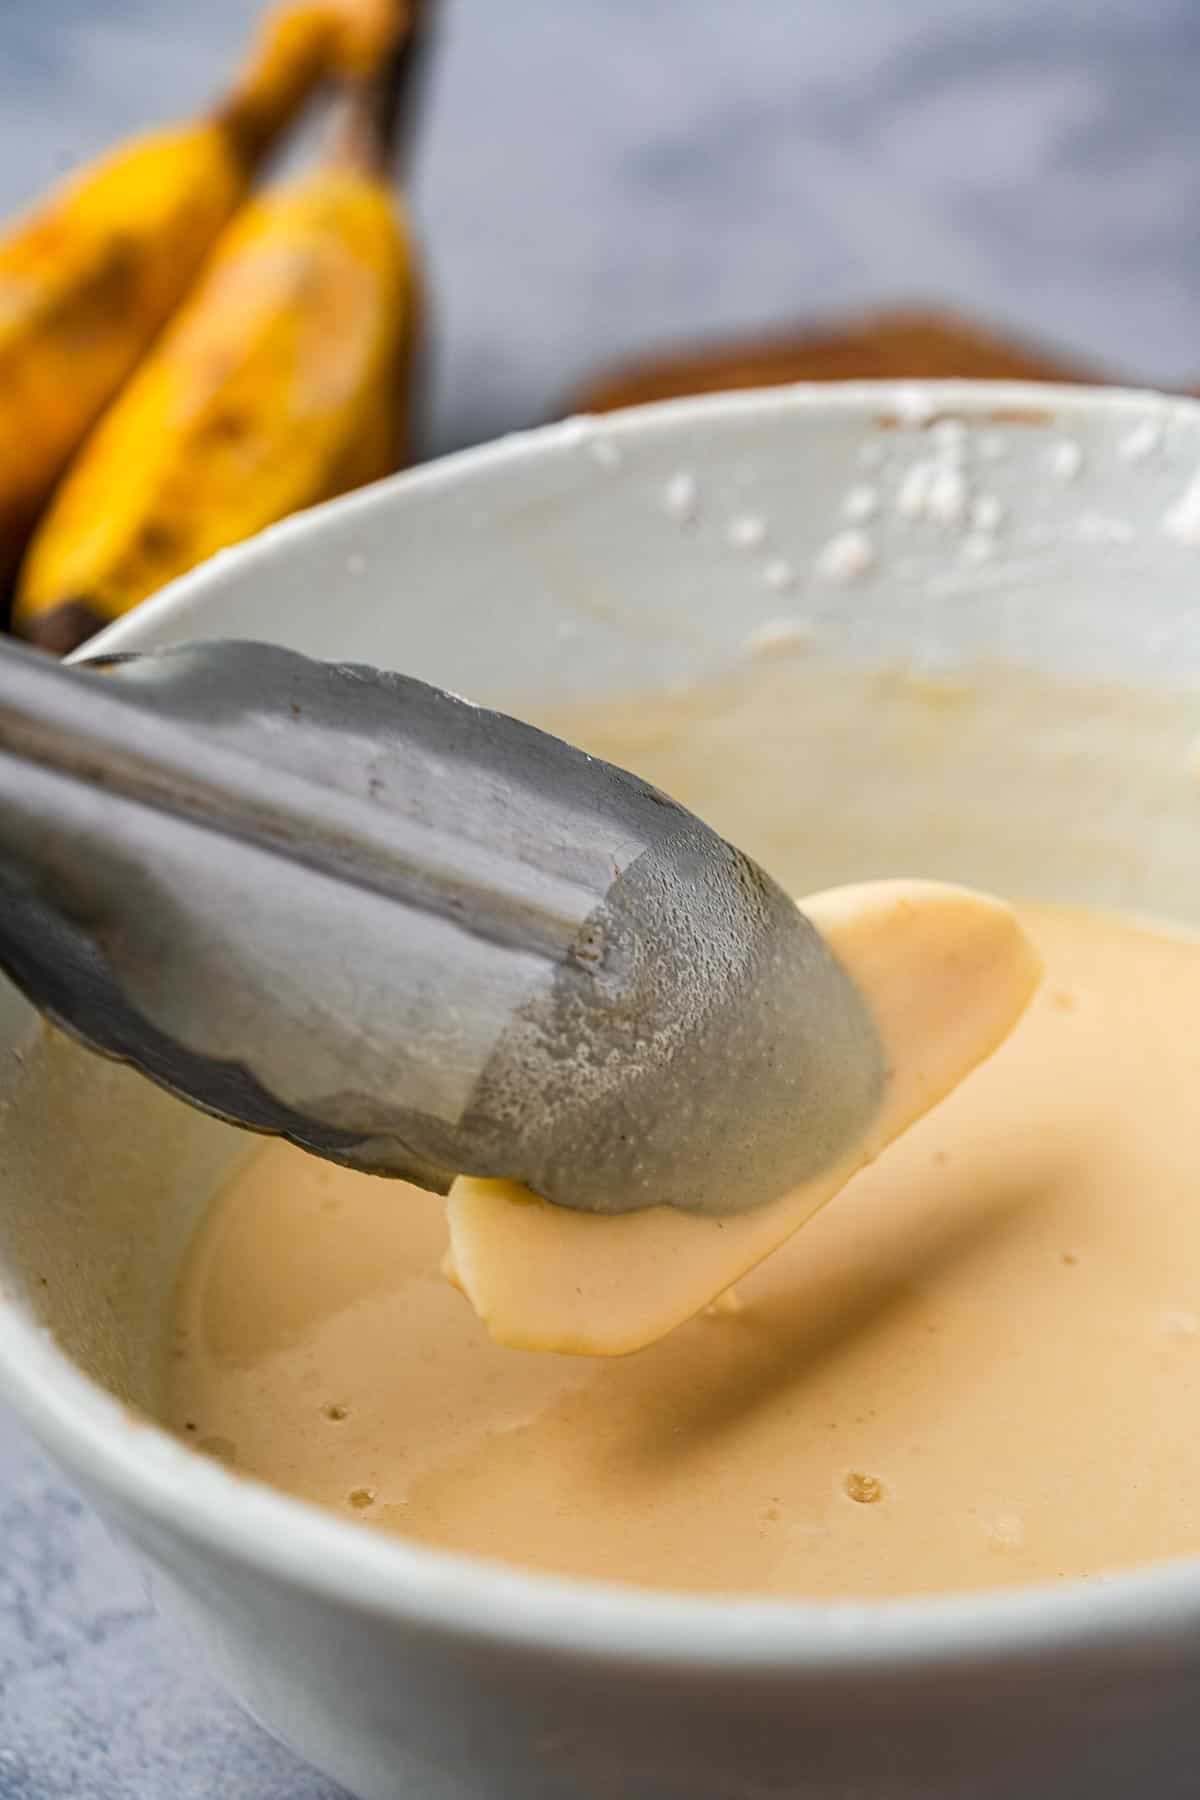 Tongs are being used to top bananas into a bowl of batter.